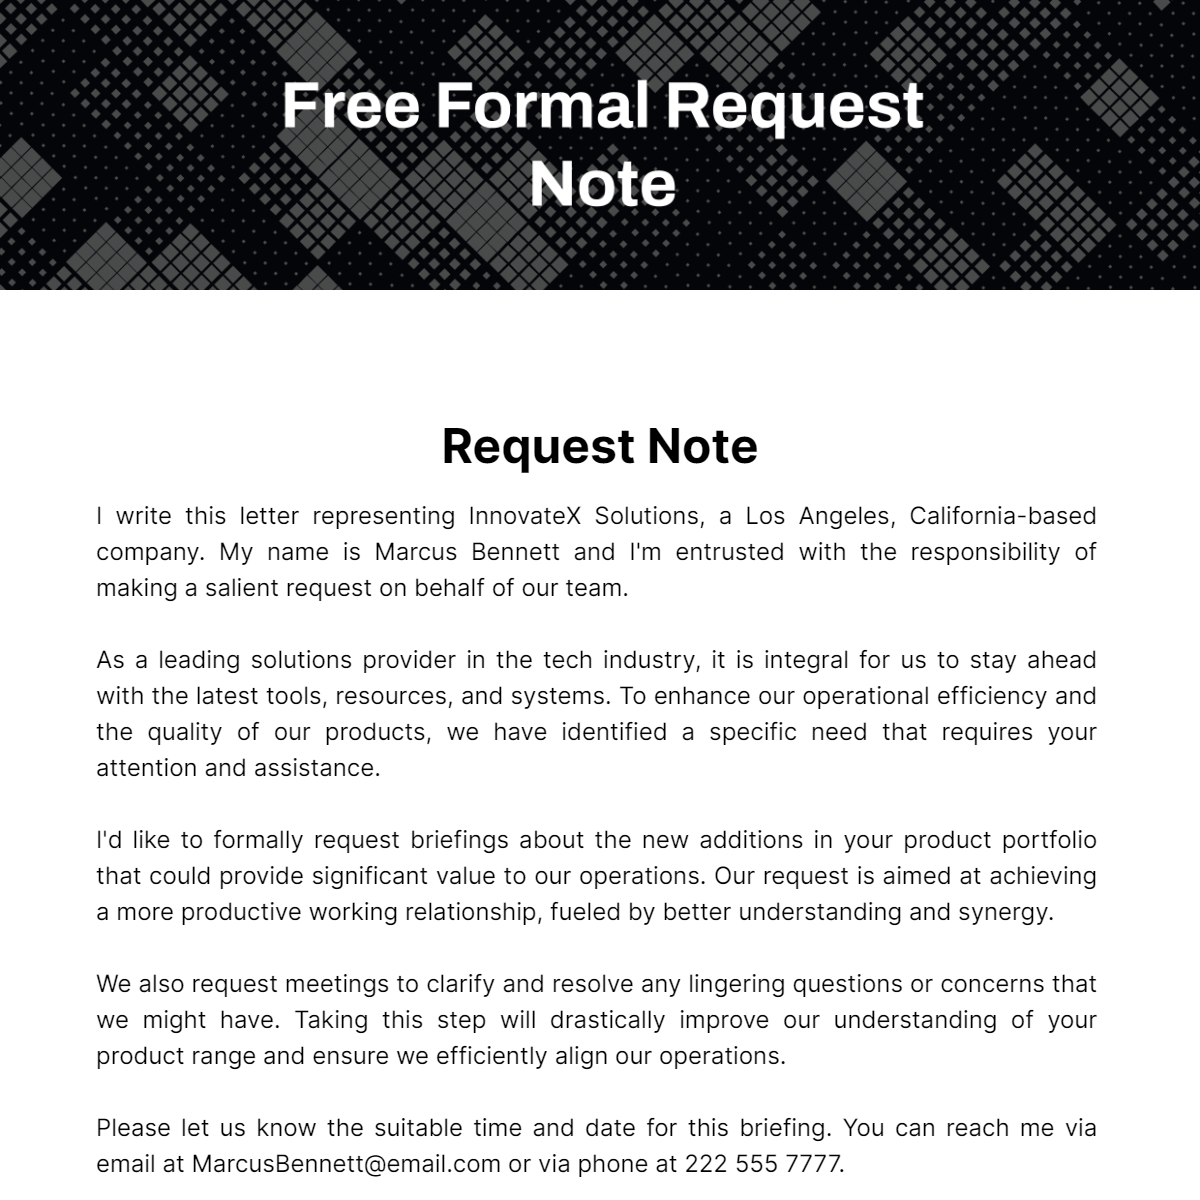 Formal Request Note Template